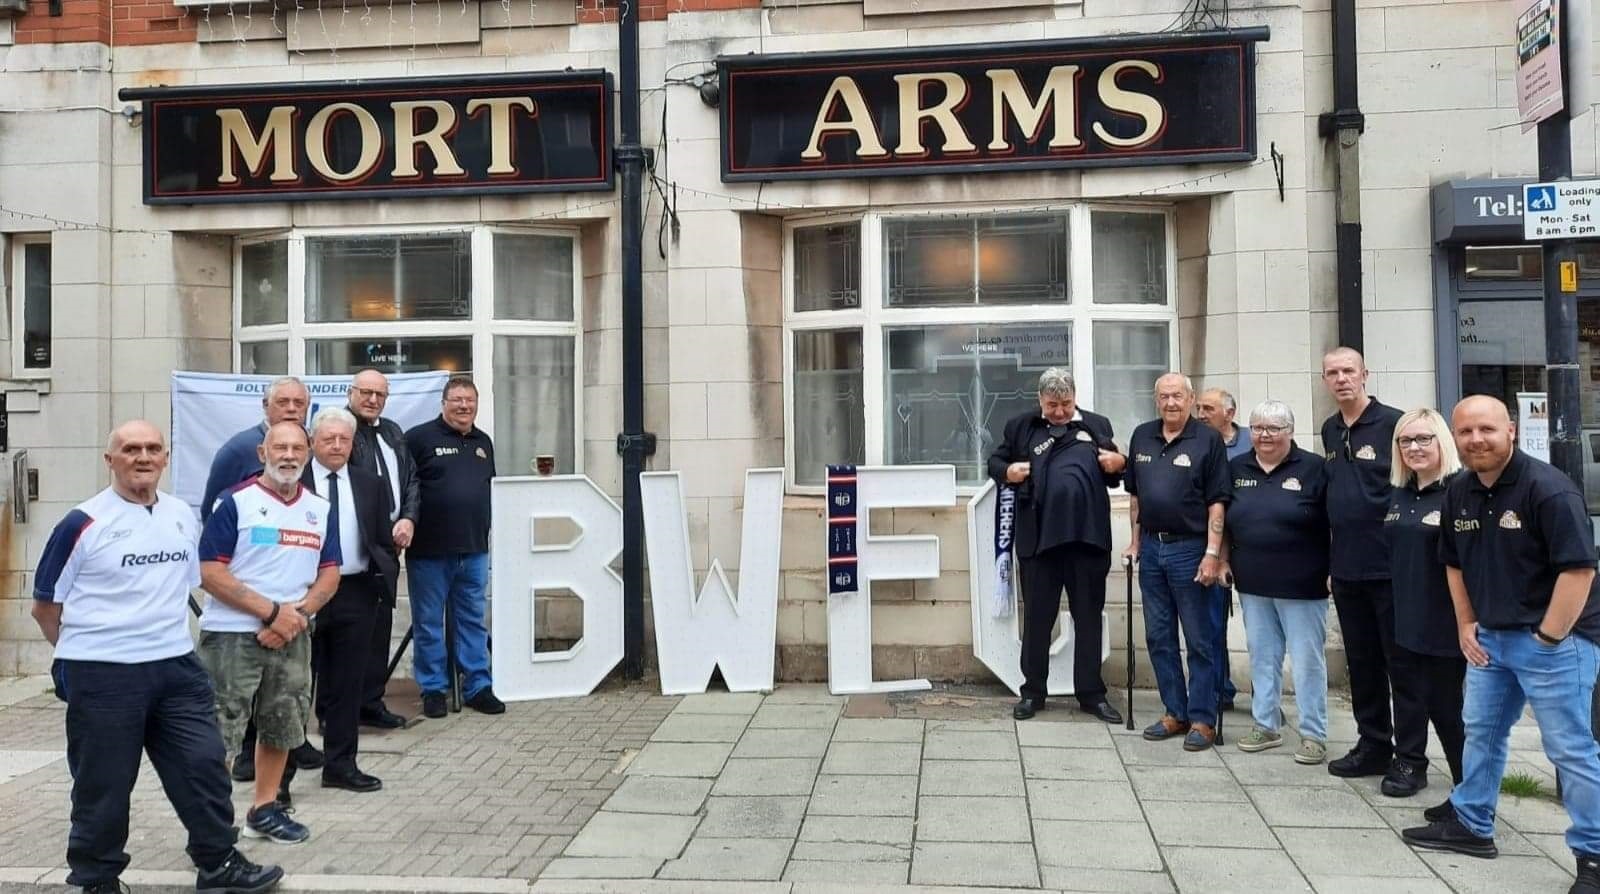 Respects have been paid to the lifelong Bolton Wanderers fan